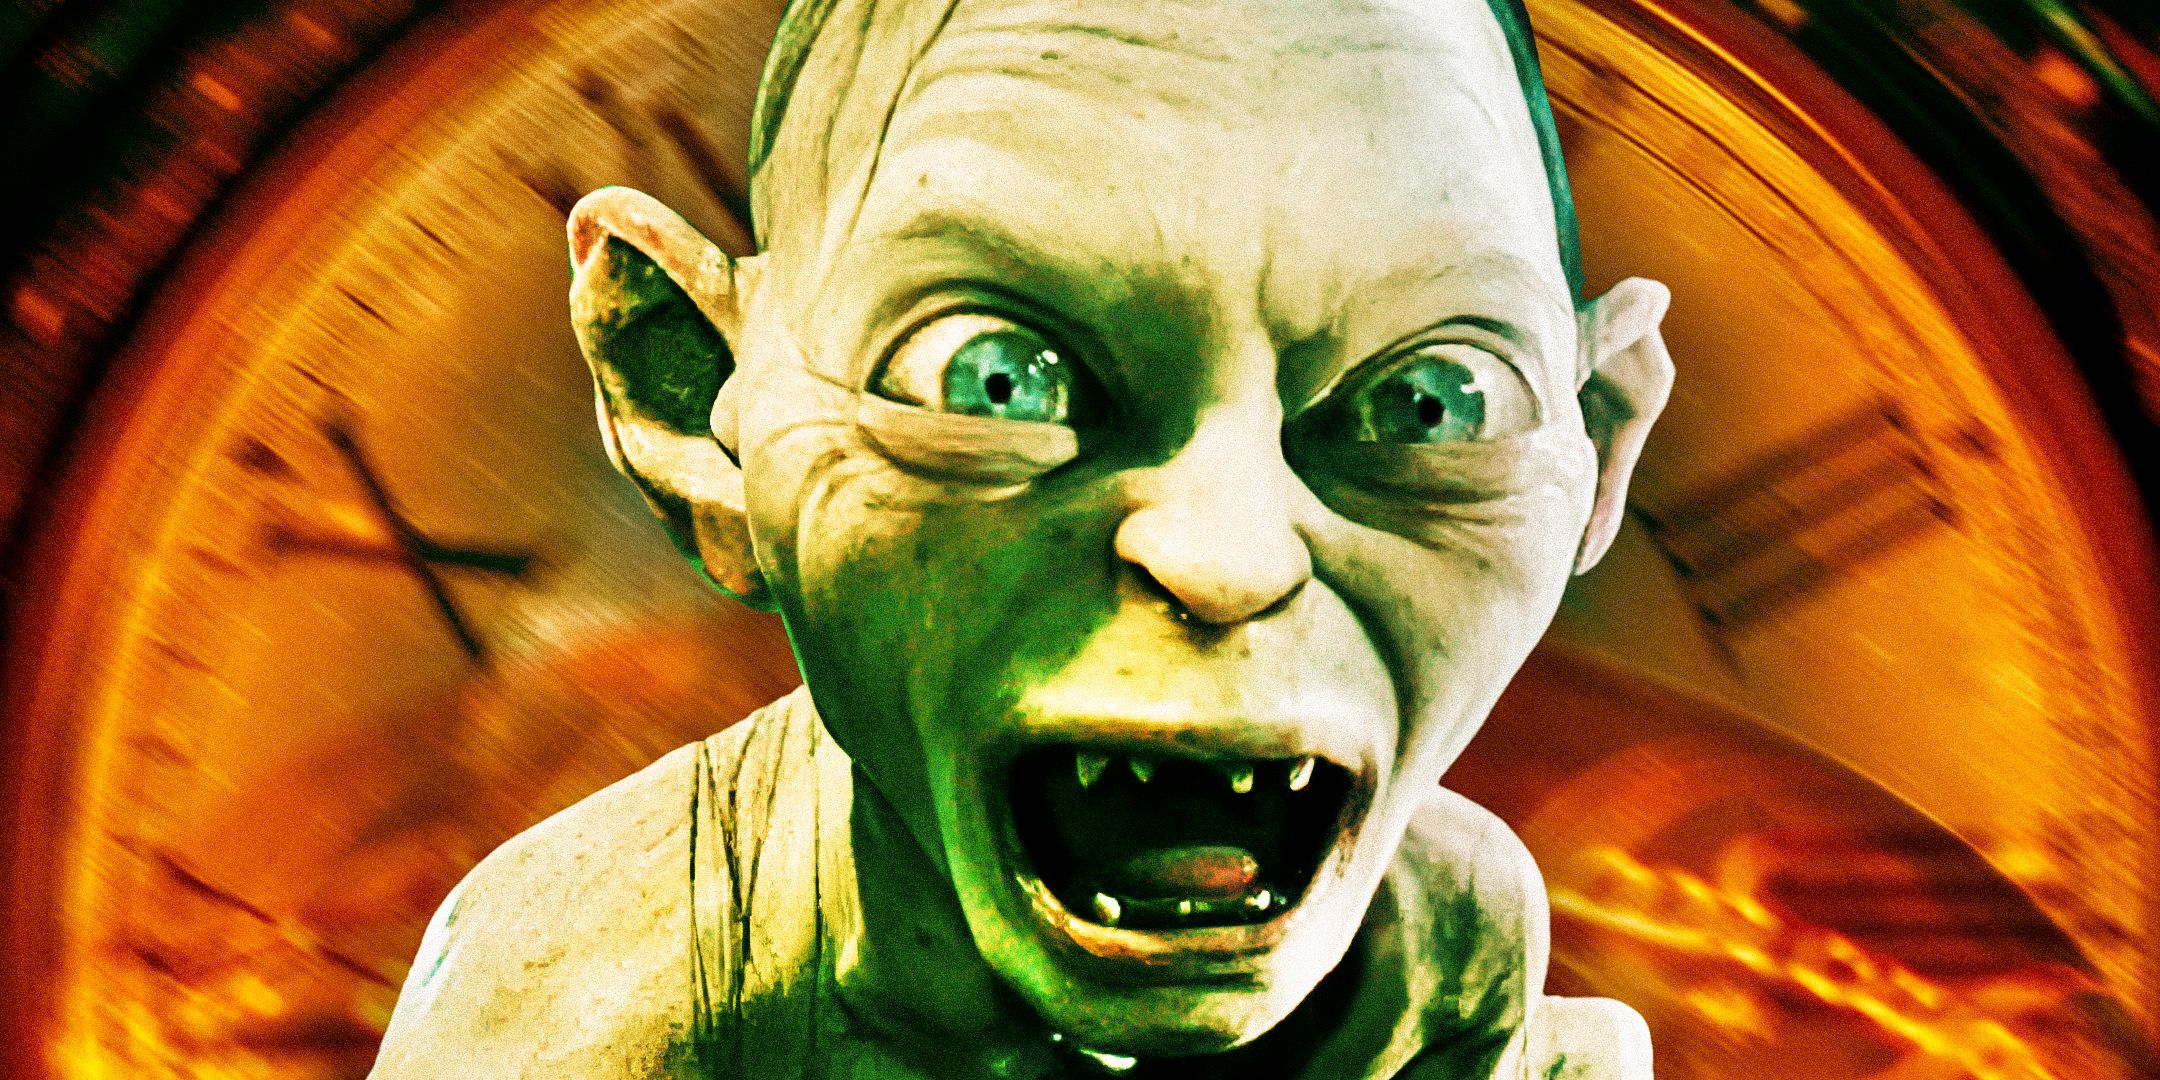 Gollum yelling in the Lord of the Rings movies